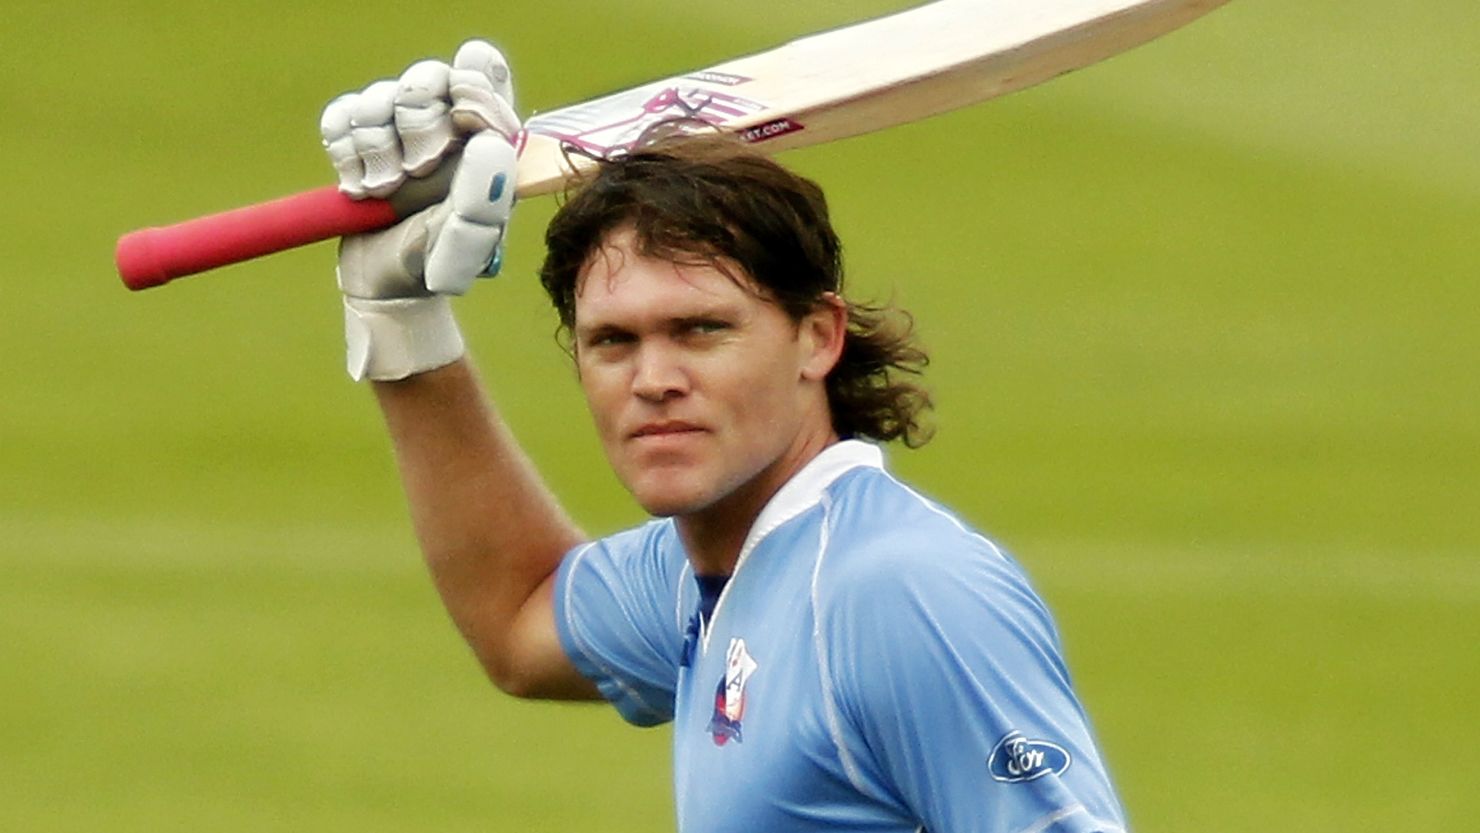 Former New Zealand test batsman Lou Vincent says he is cooperating with the ICC investigation.